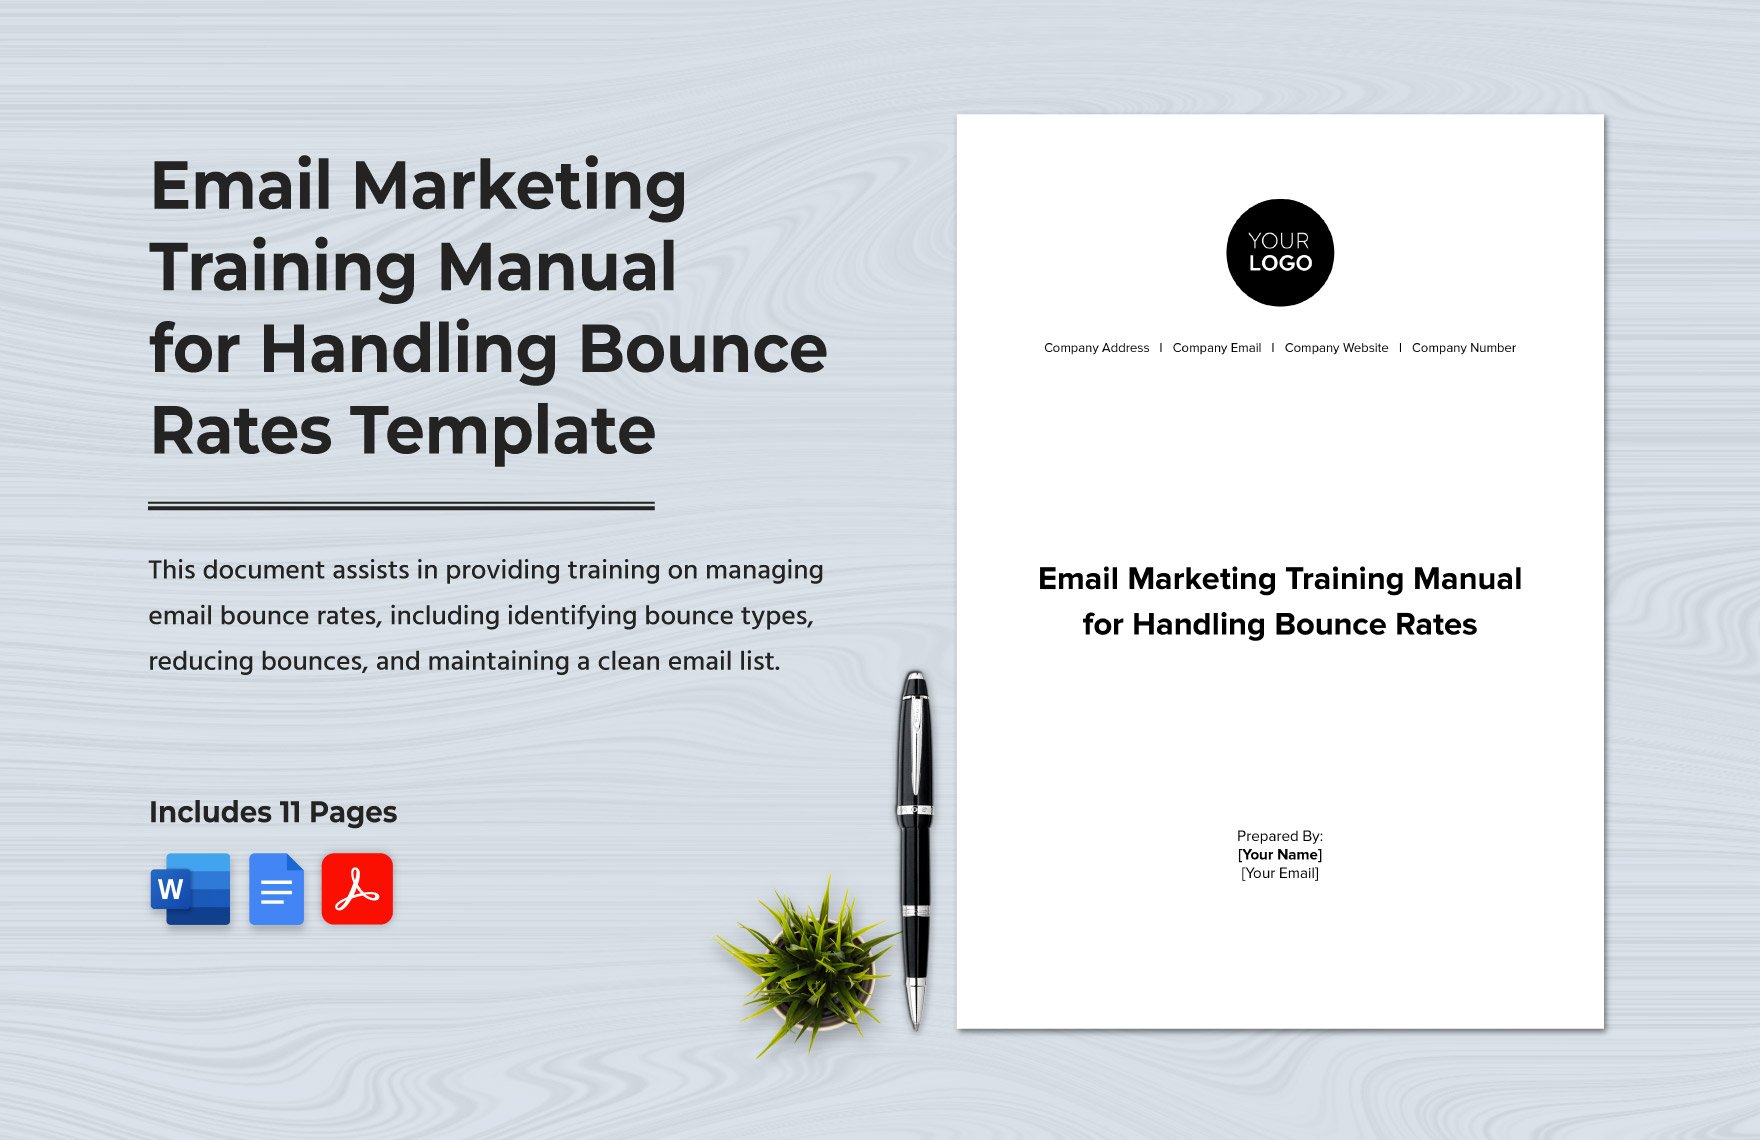 Email Marketing Training Manual for Handling Bounce Rates Template